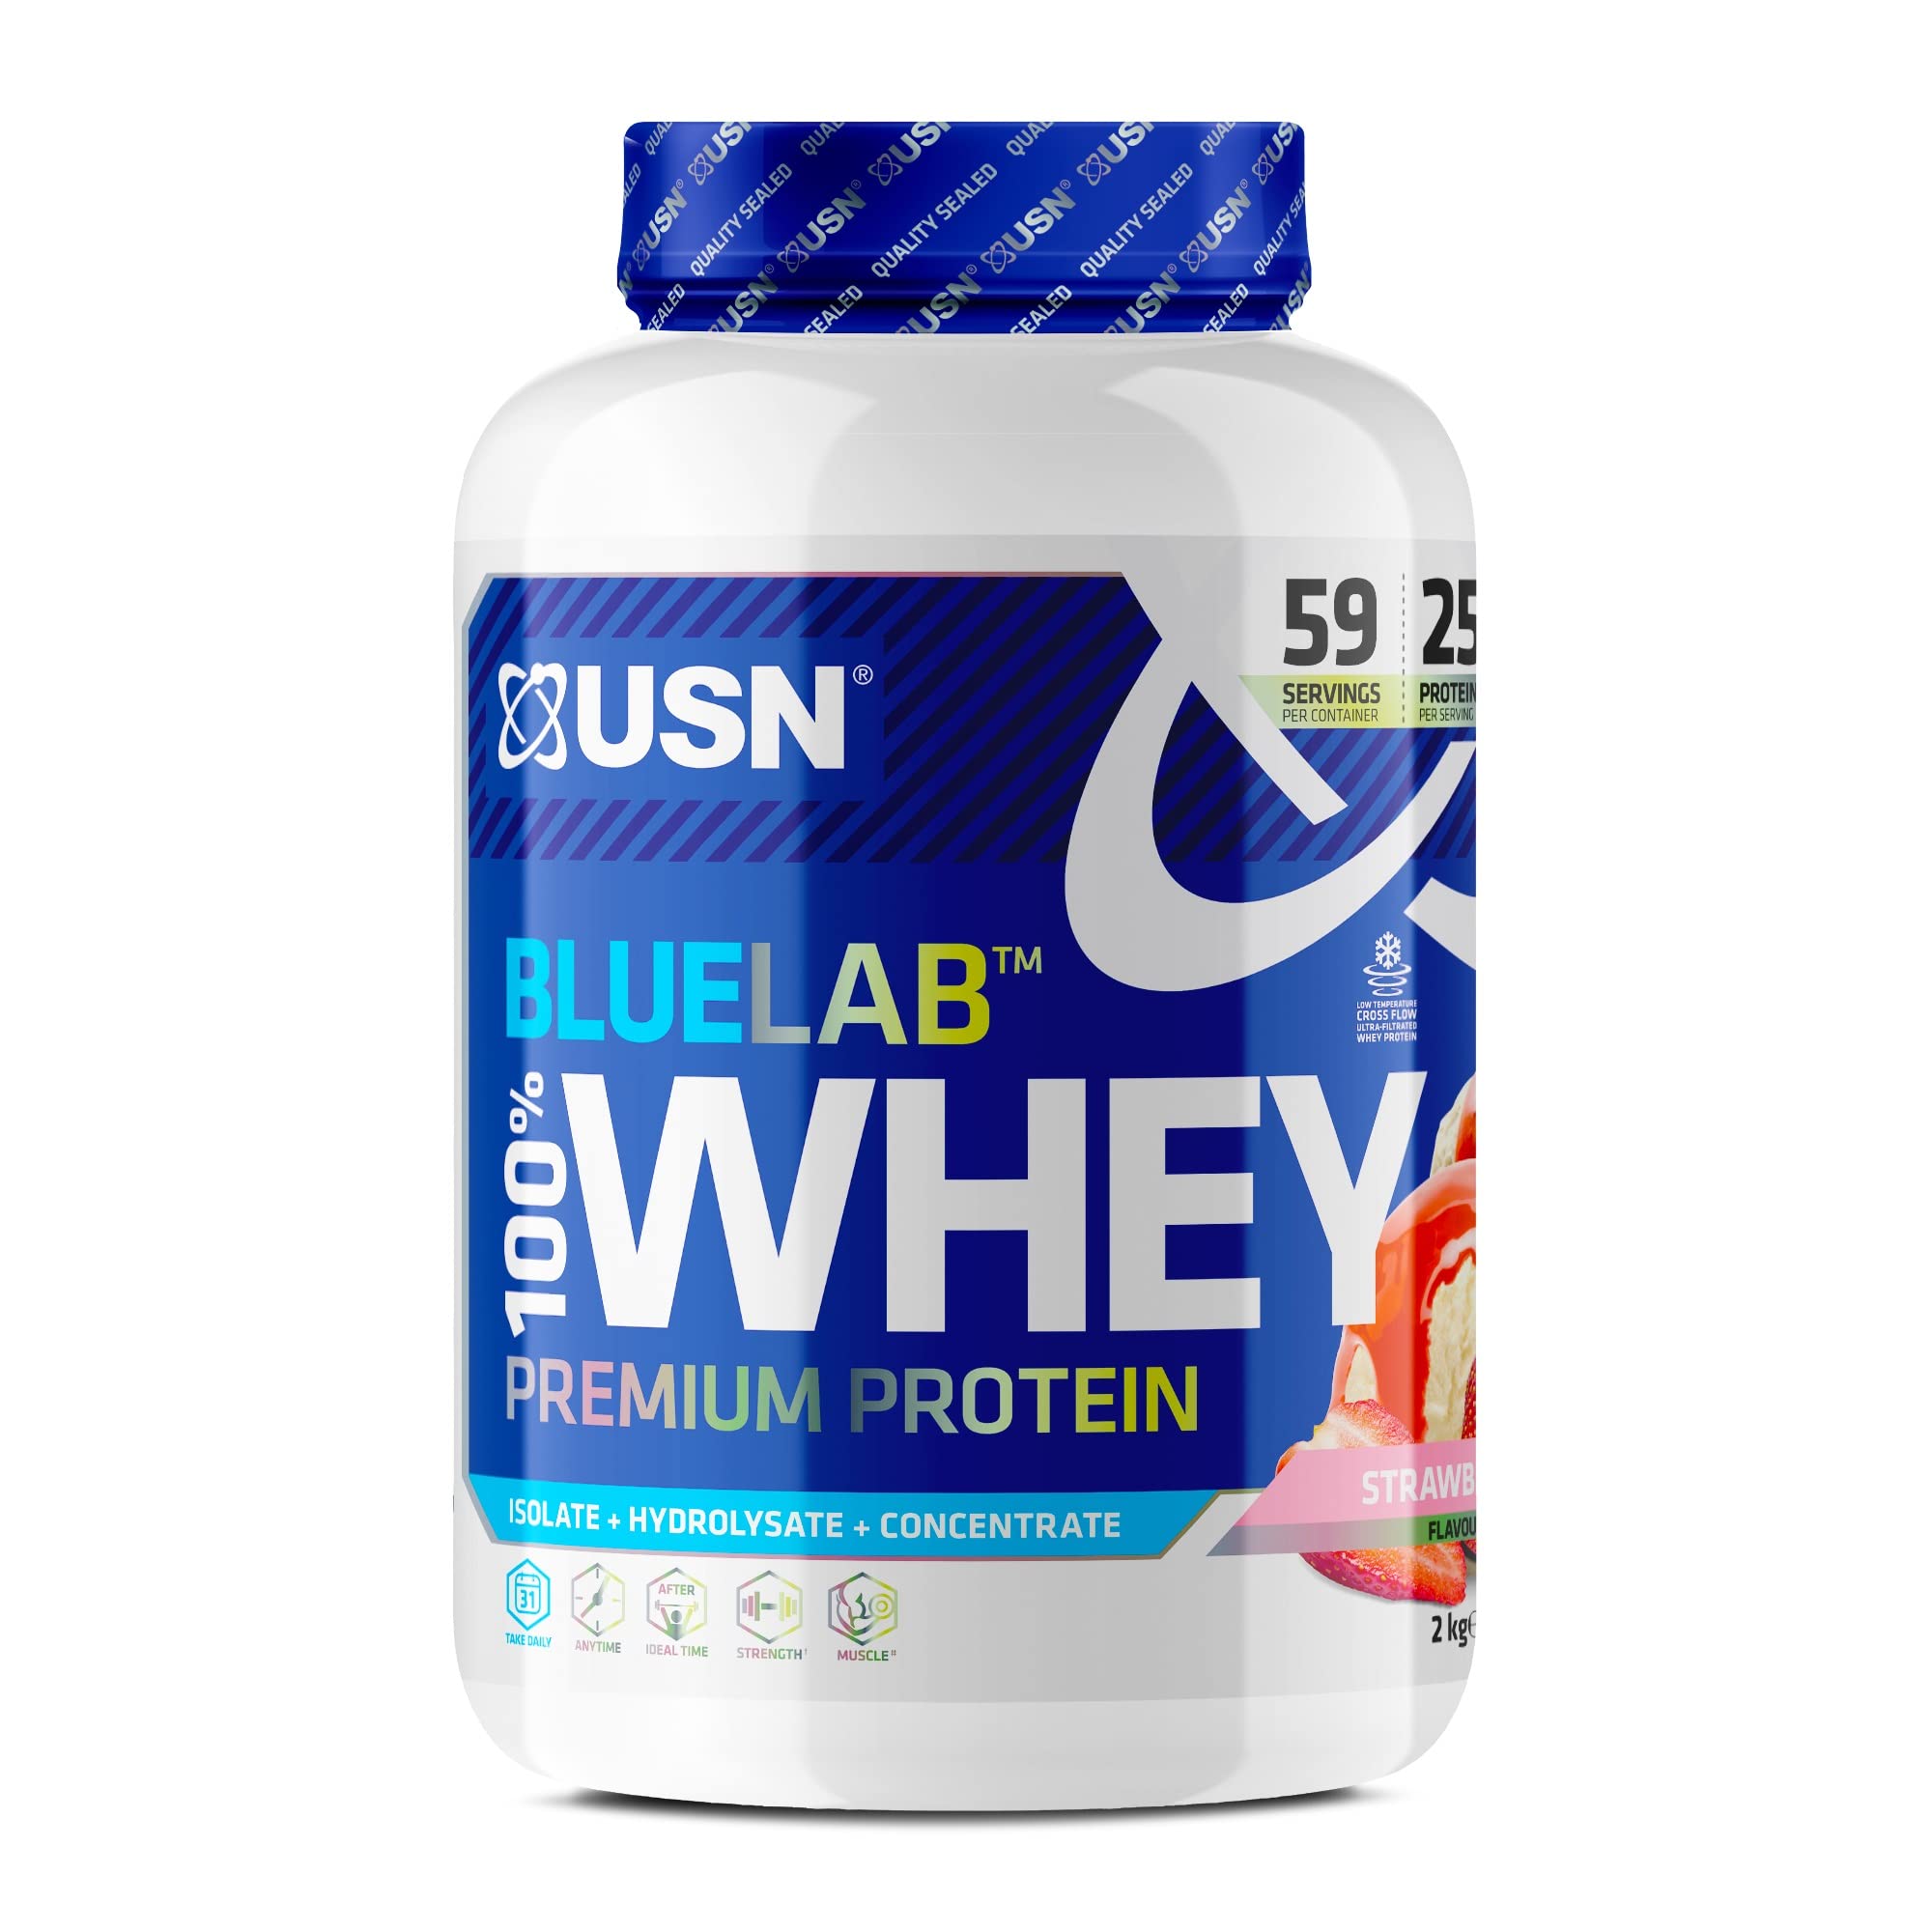 Premium Whey Protein Powder: USN Blue Lab Whey Strawberry 2 kg, Scientifically formulated Whey Protein Post-Workout Muscle Building Supplement Powder Shake With BCAAs